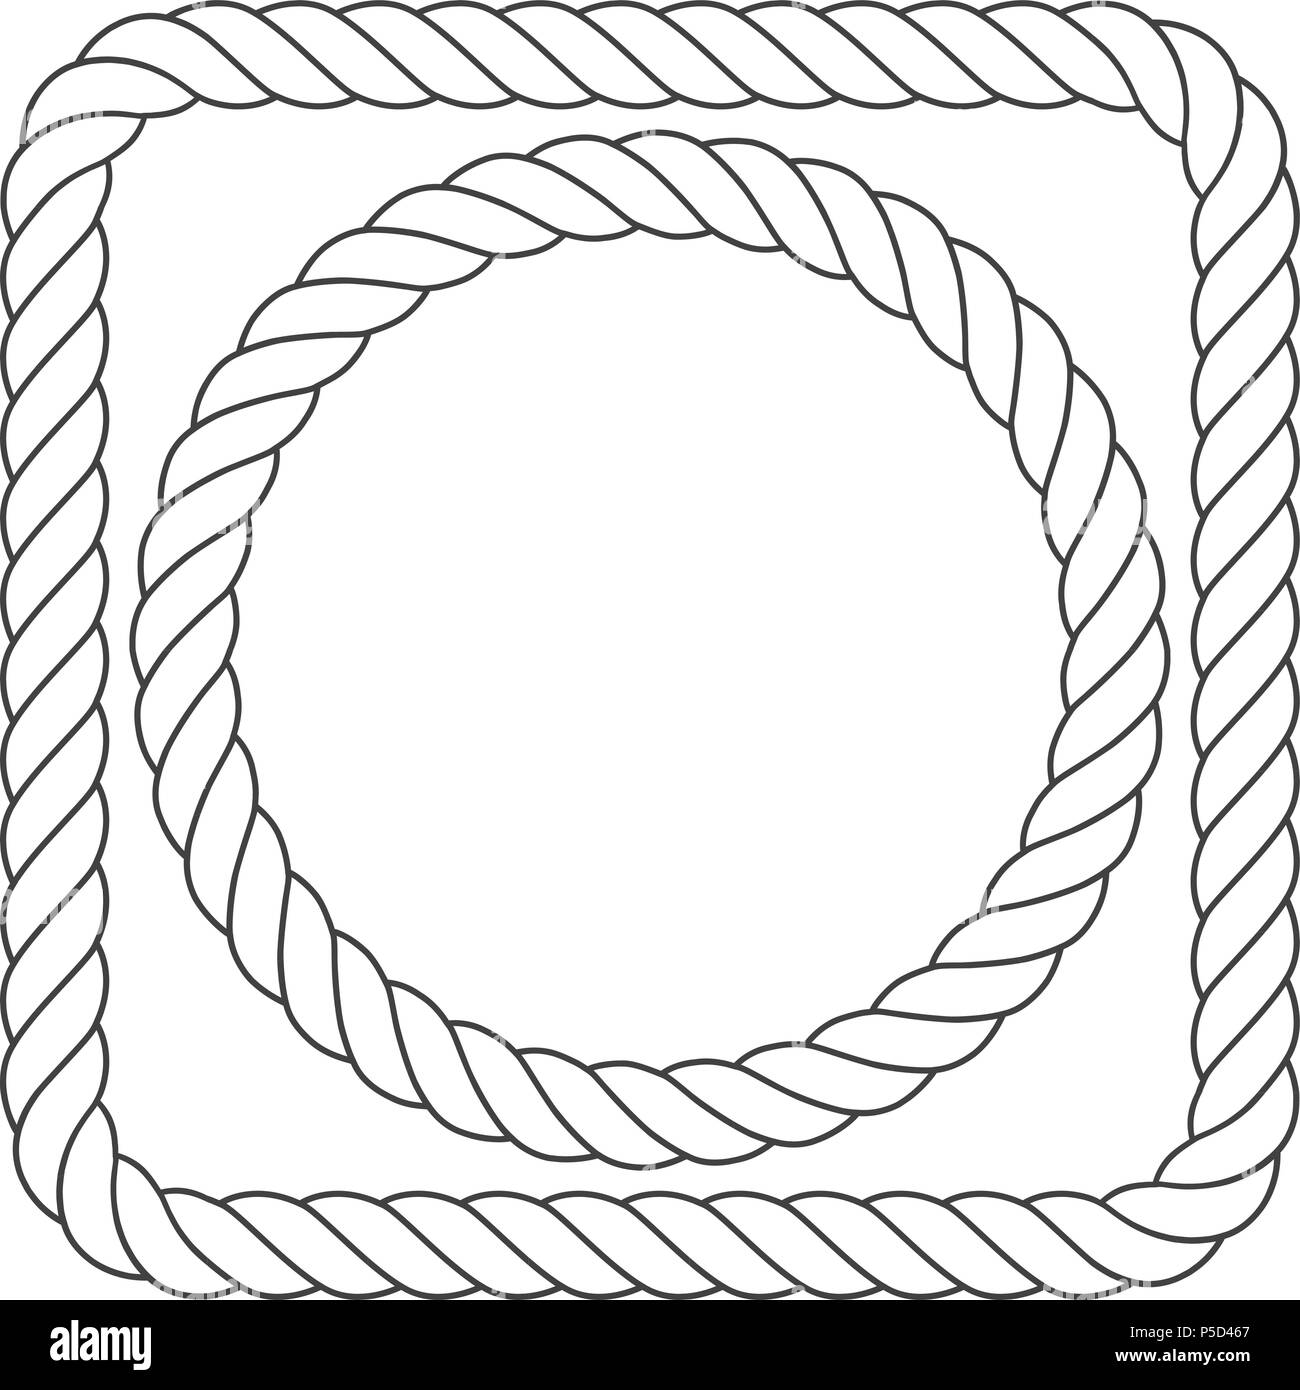 Simple rope frames - square and round rope borders Stock Vector